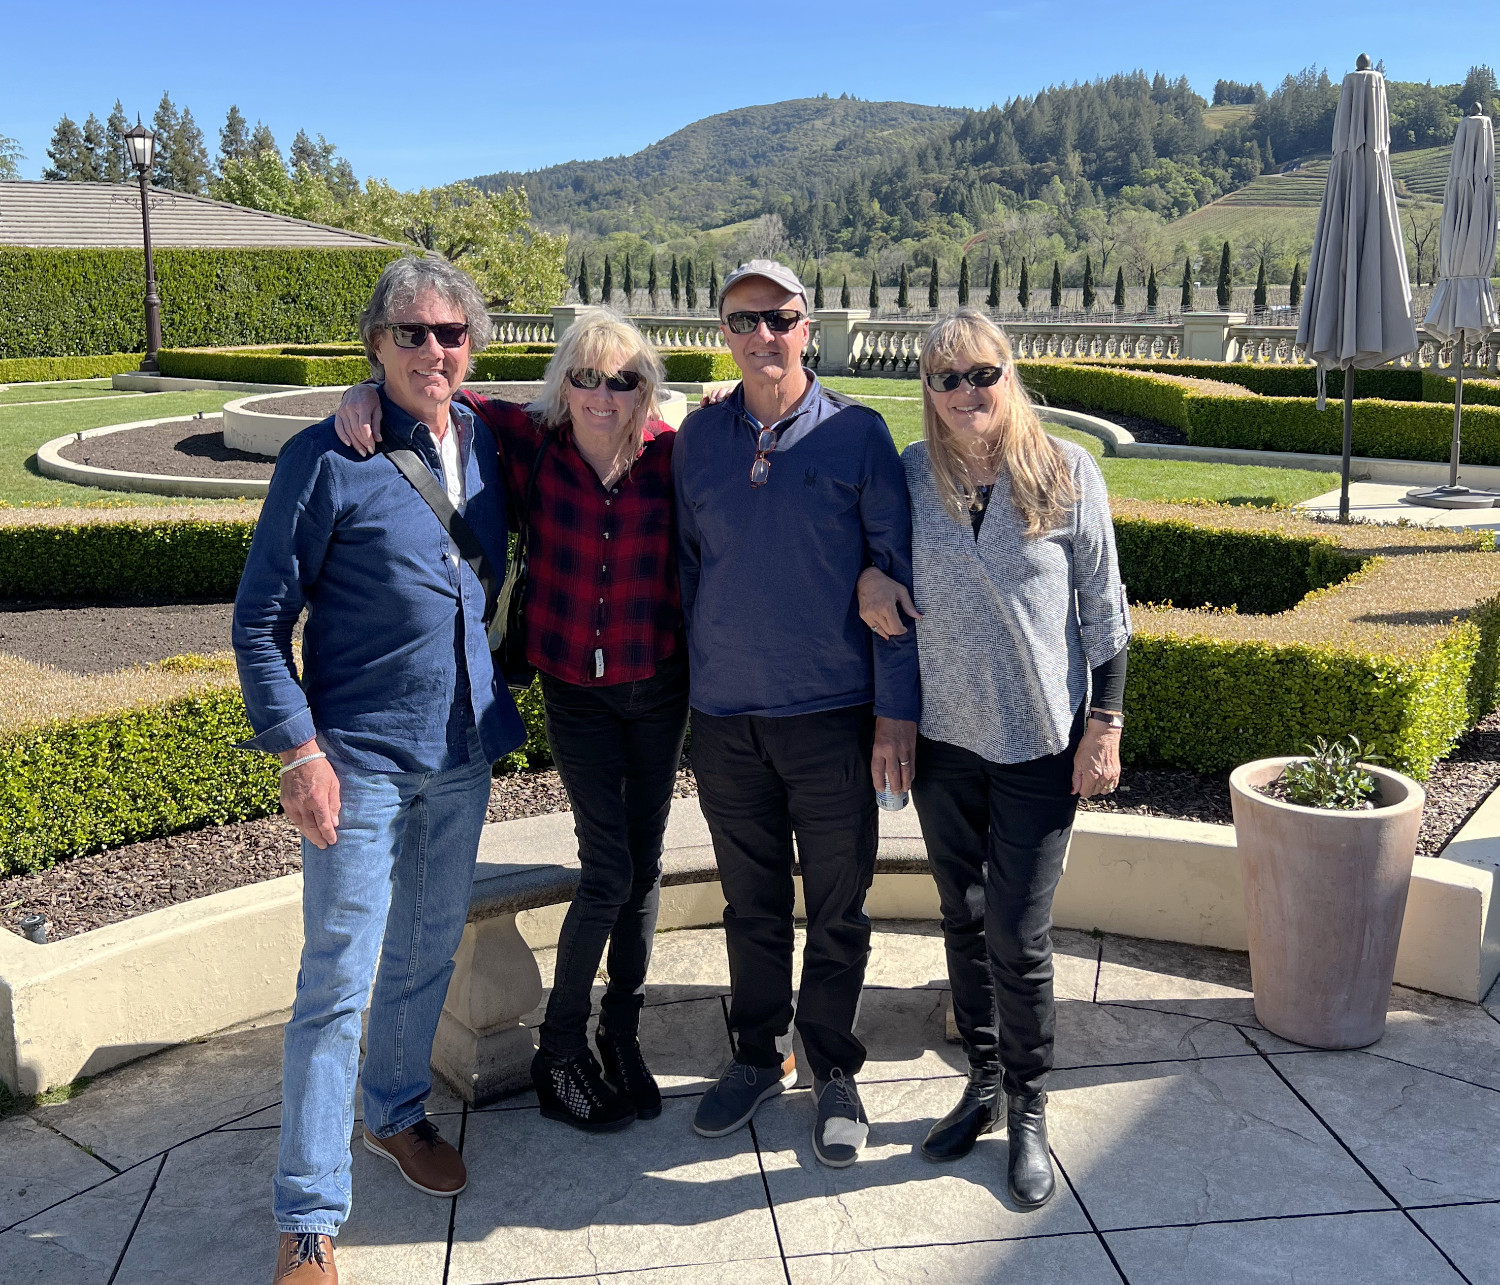 Smiths and Jones at Winery